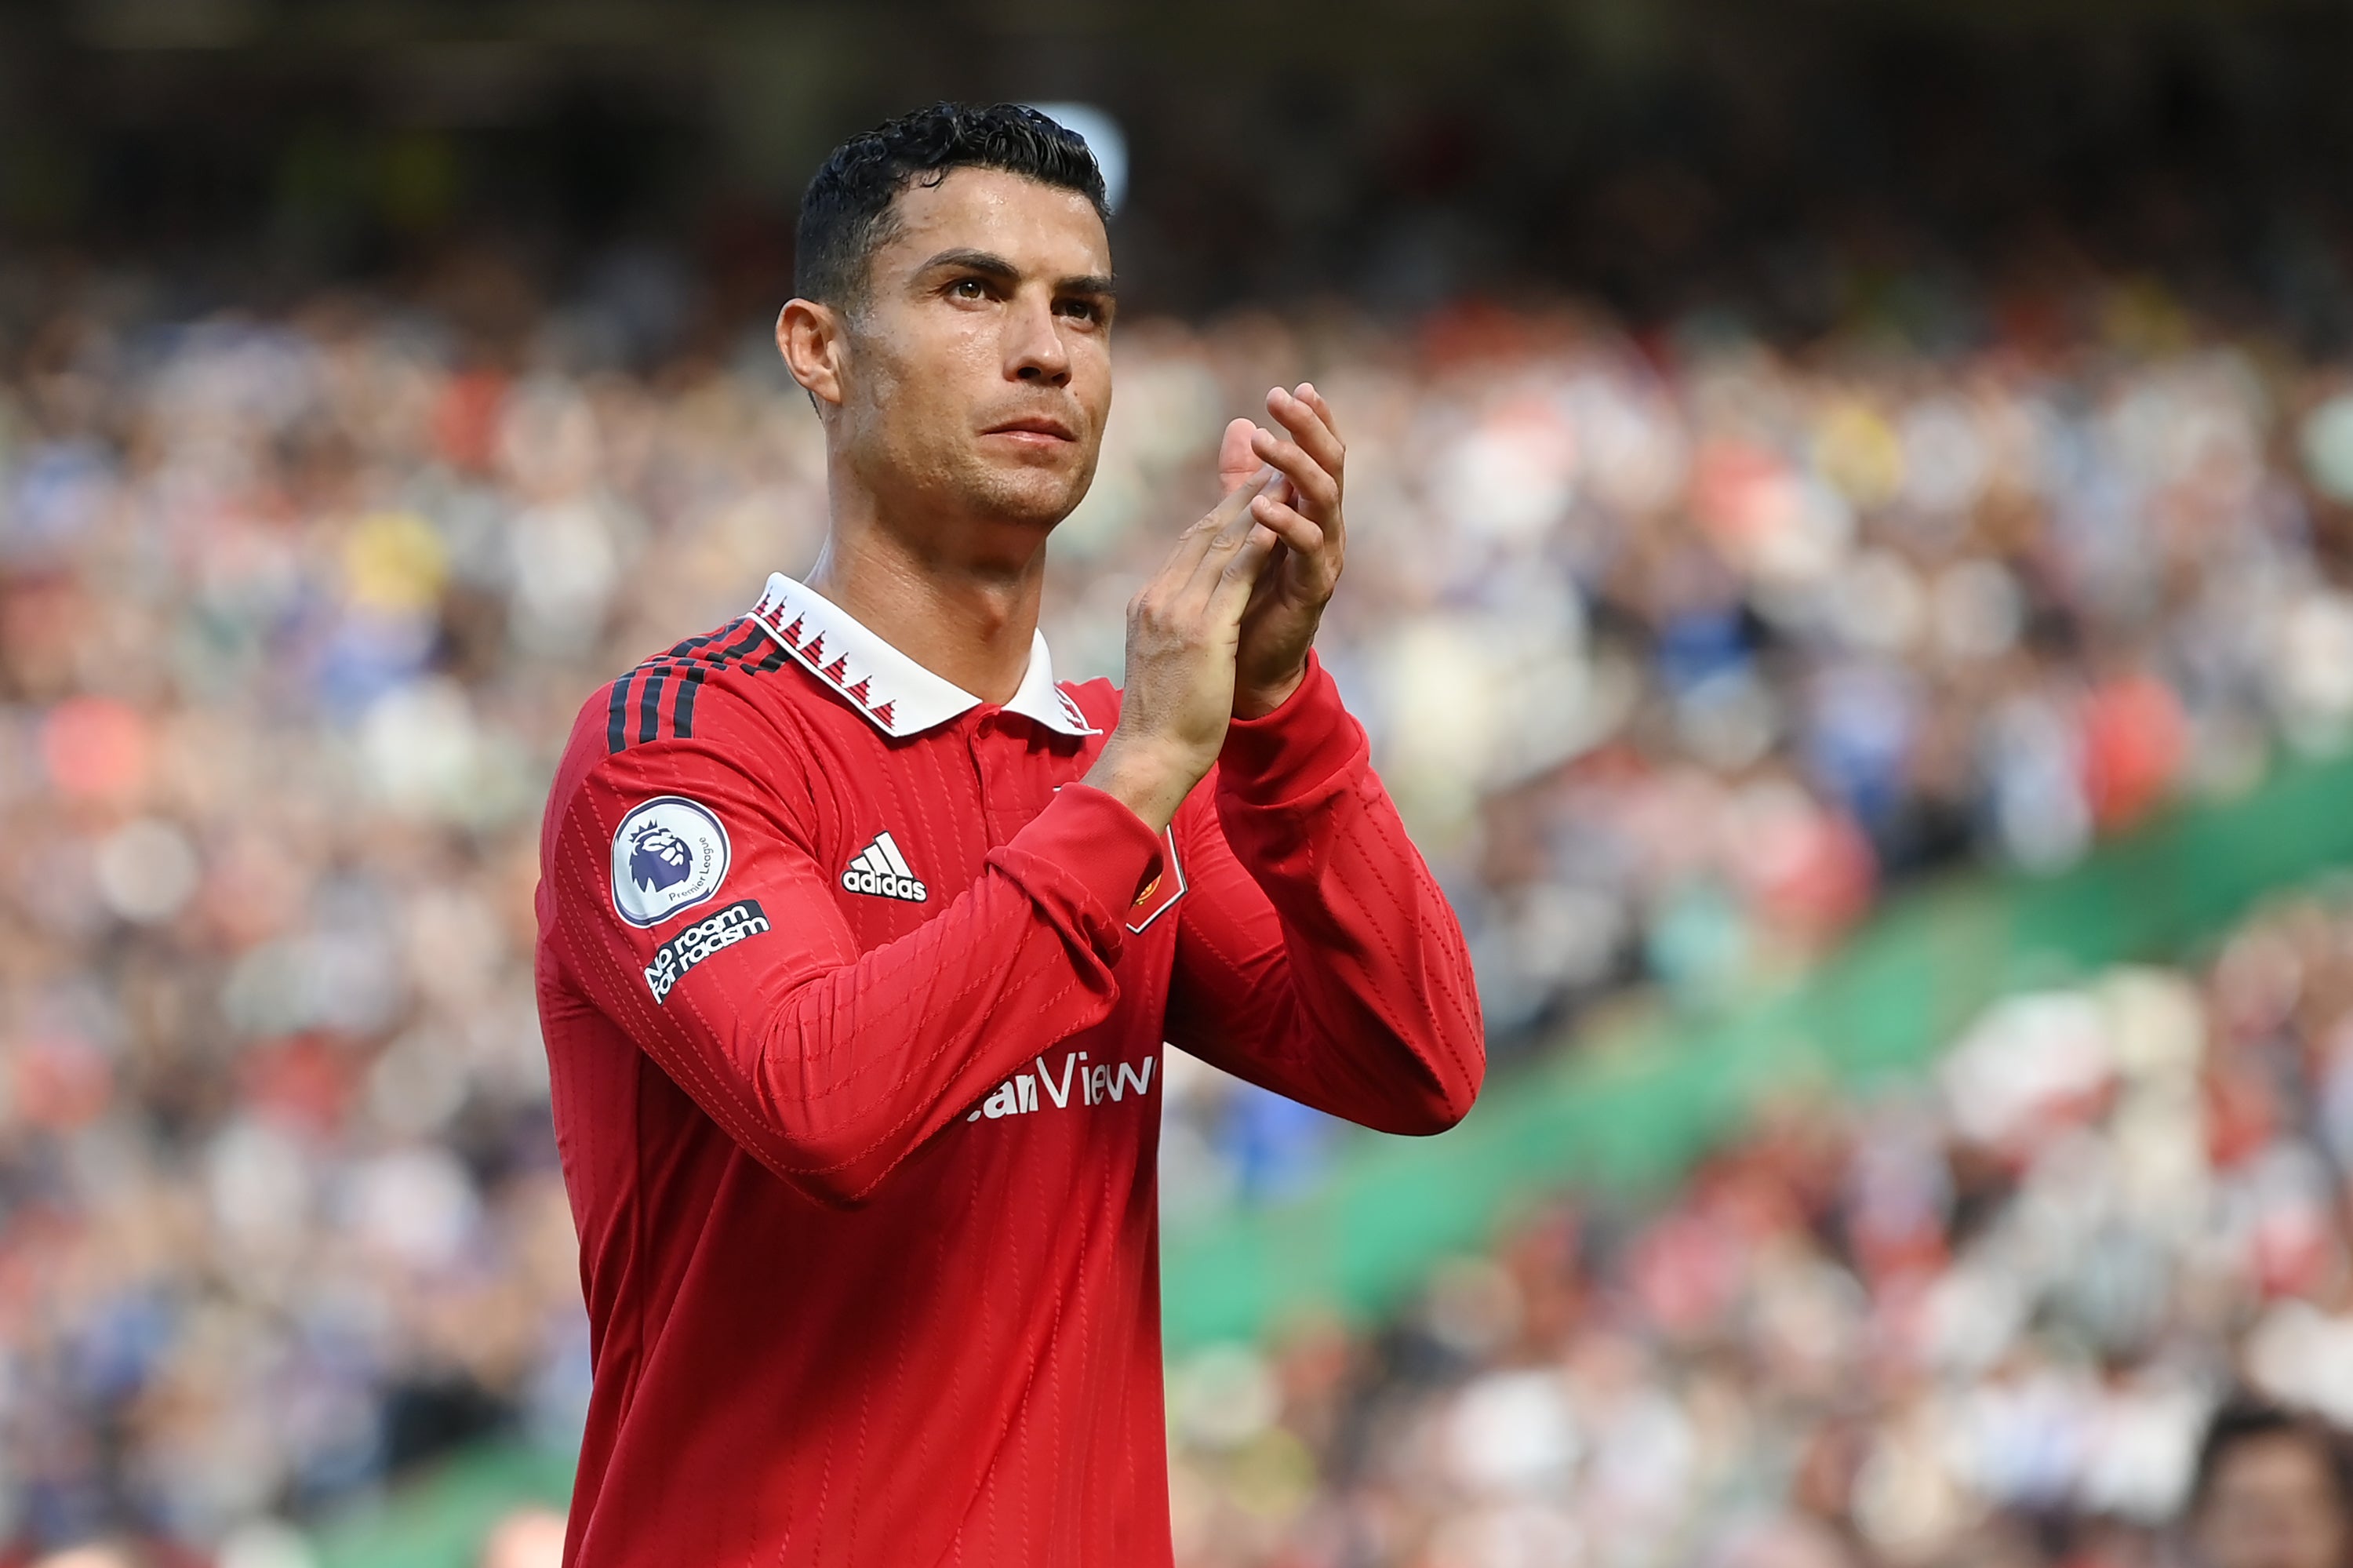 Cristiano Ronaldo has expressed a desire to leave Manchester United this summer